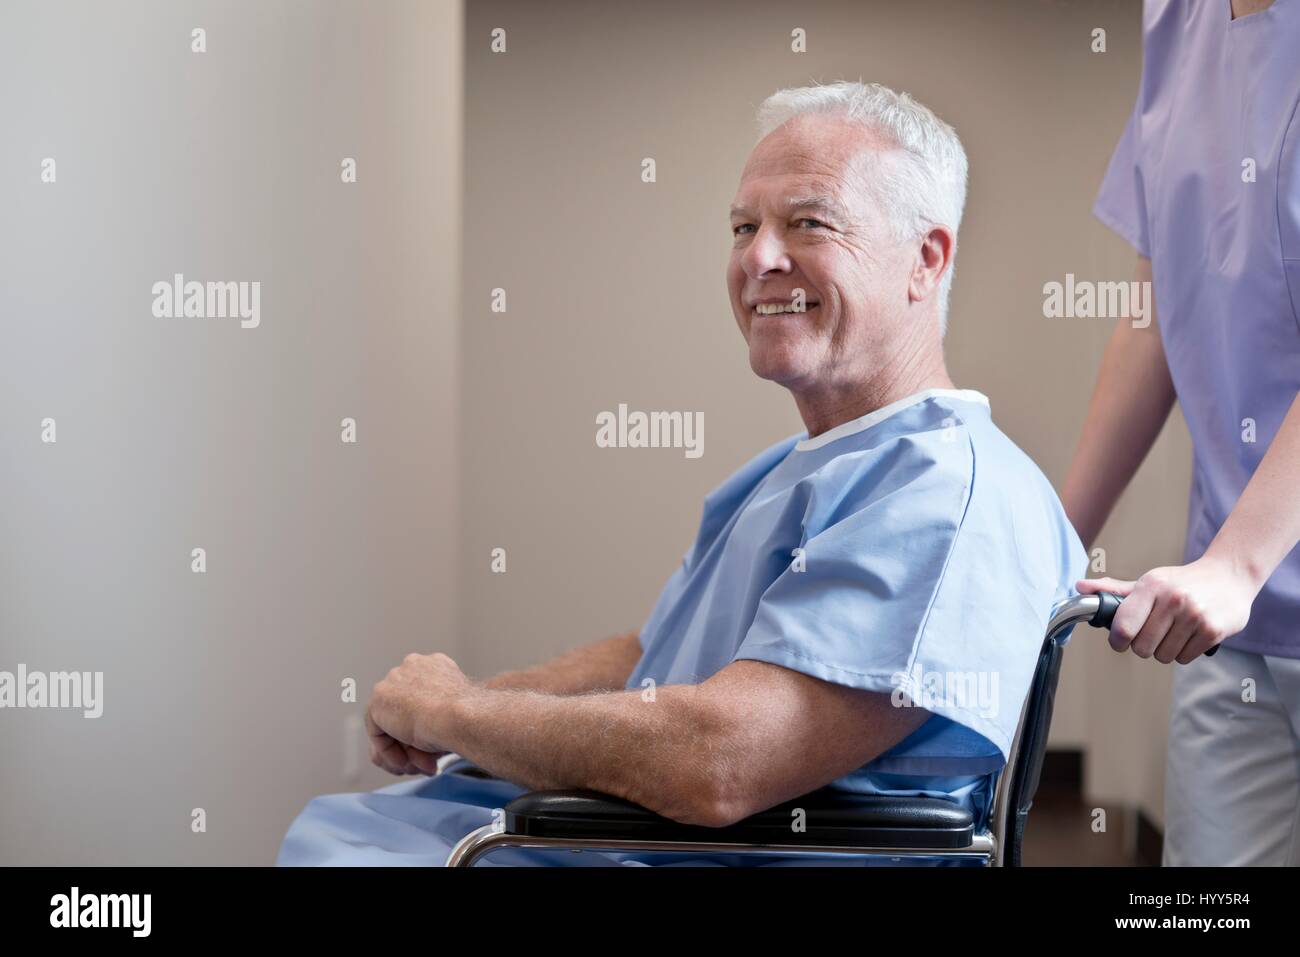 Senior man in hospital gown in wheelchair, smiling. Stock Photo